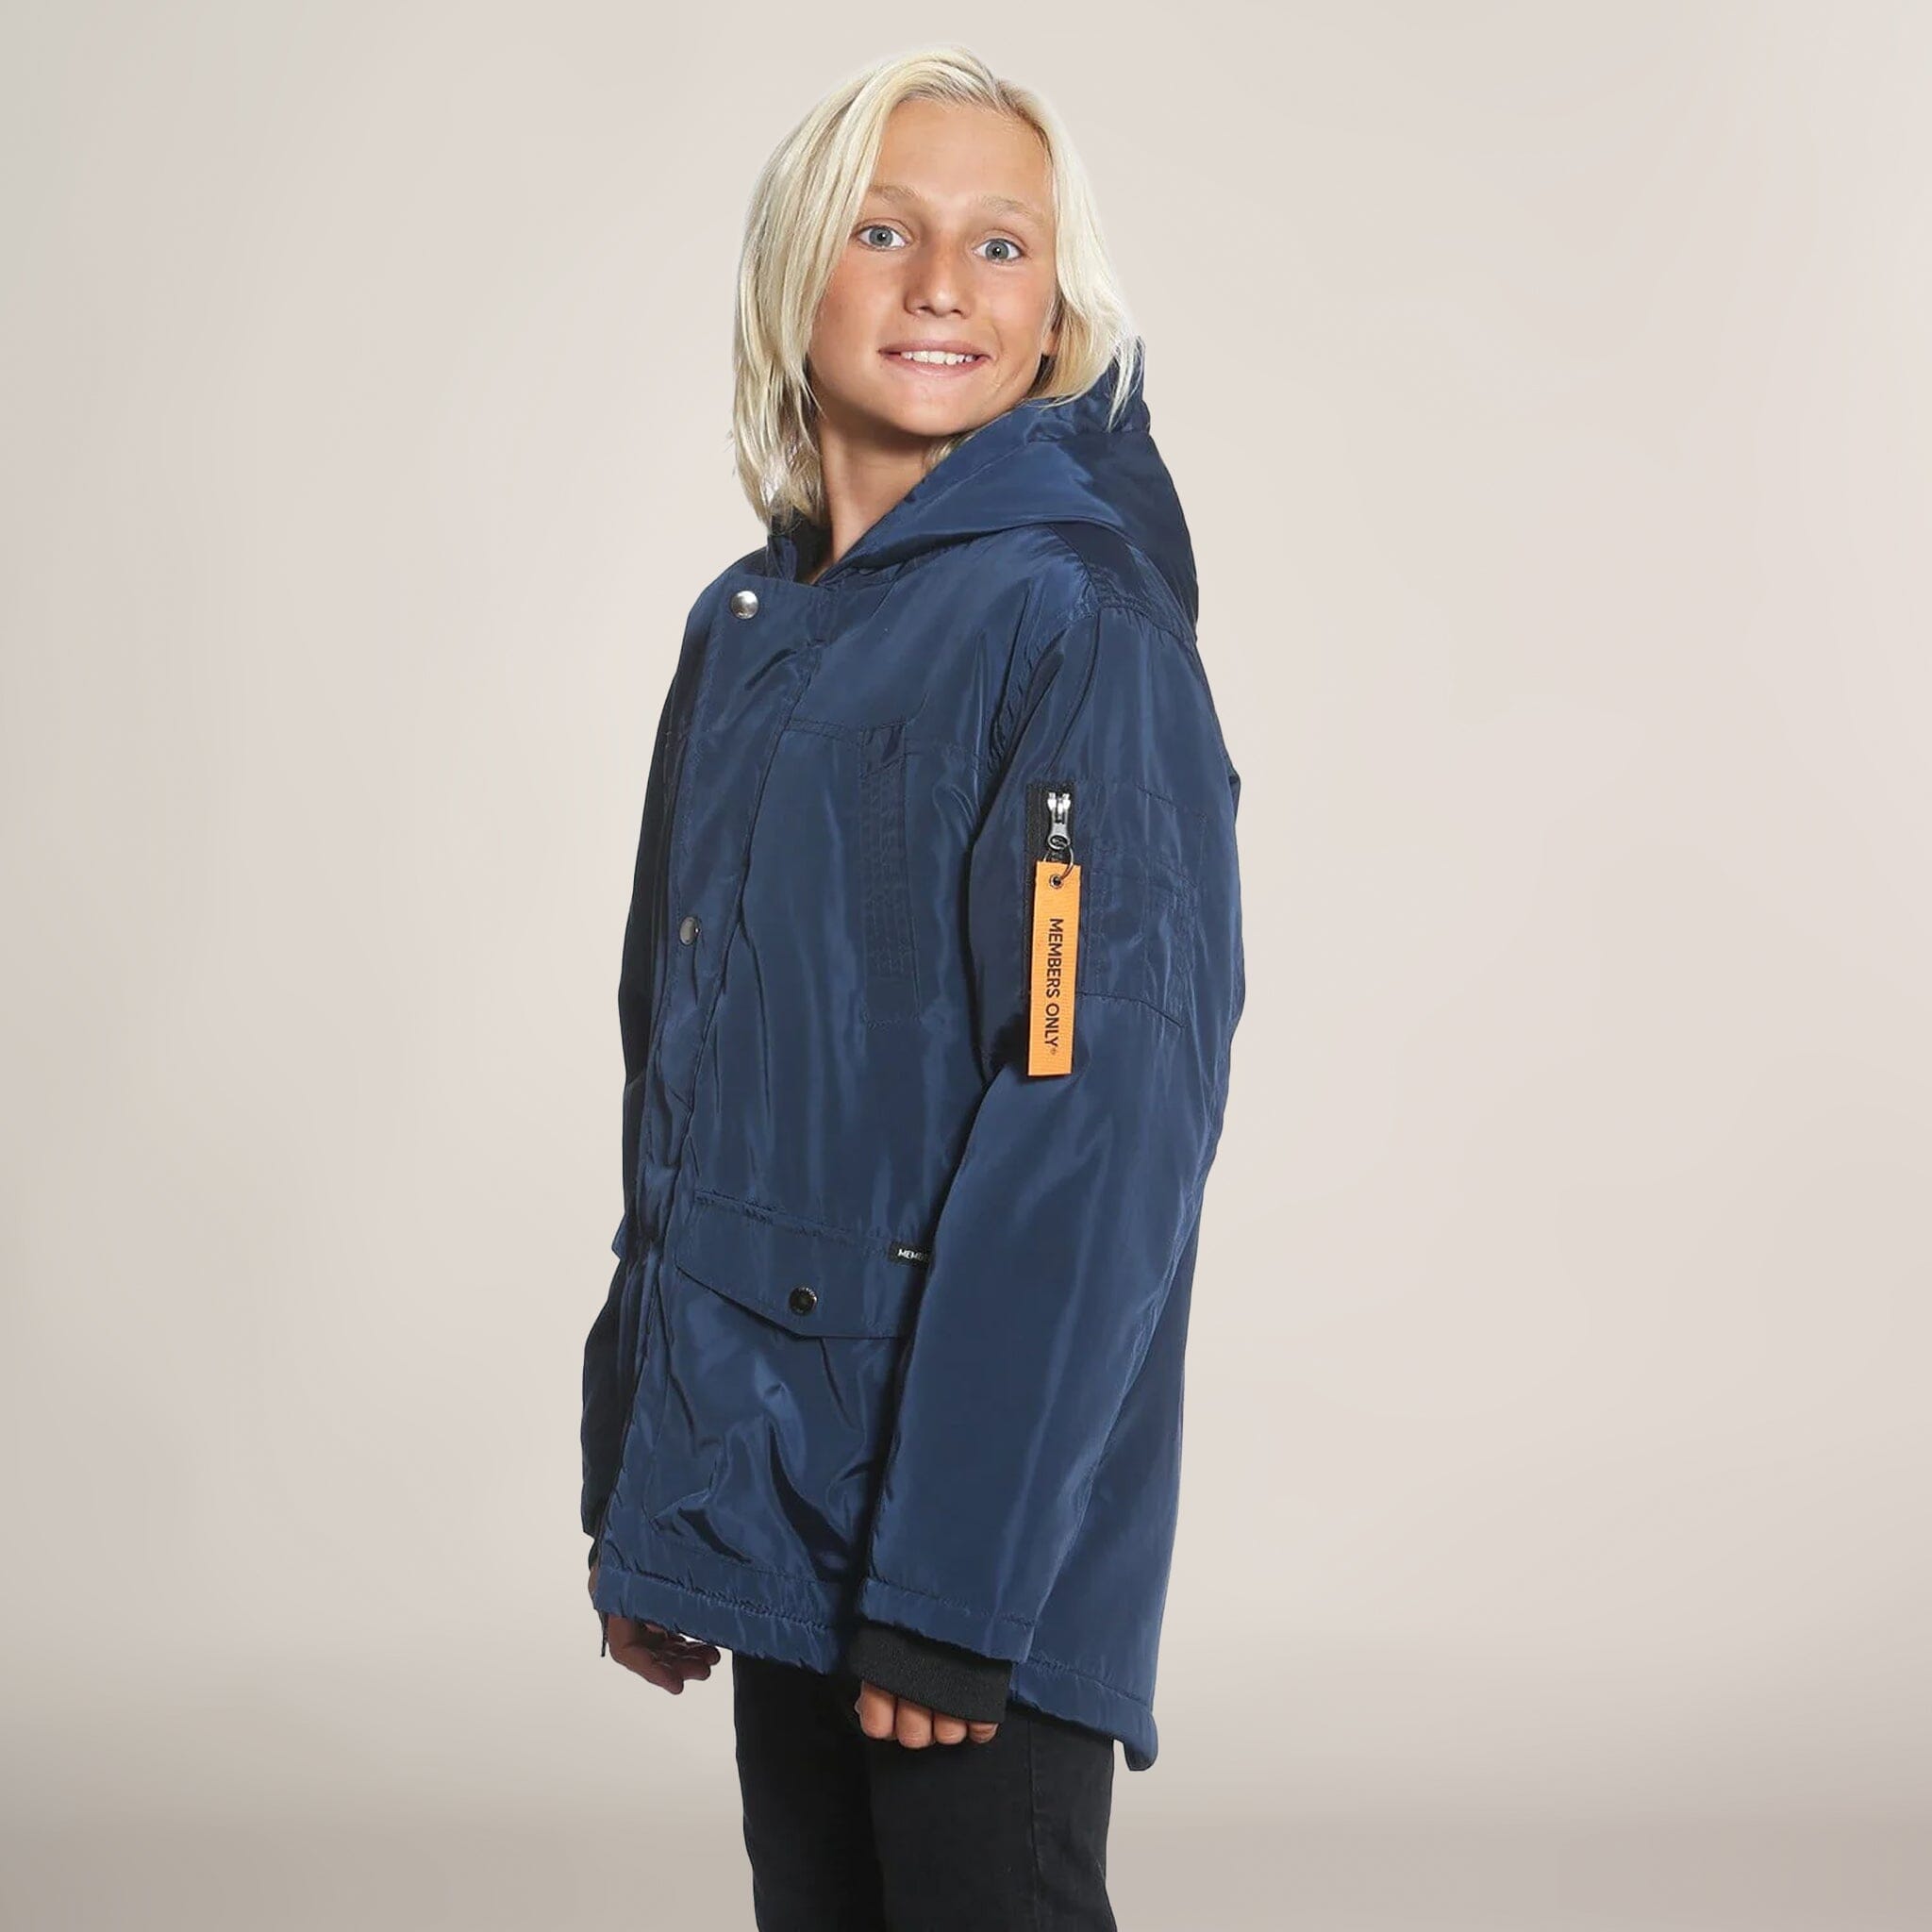 Boy's Satin Mid Weight Anorak Jacket - FINAL SALE Anorak Members Only 